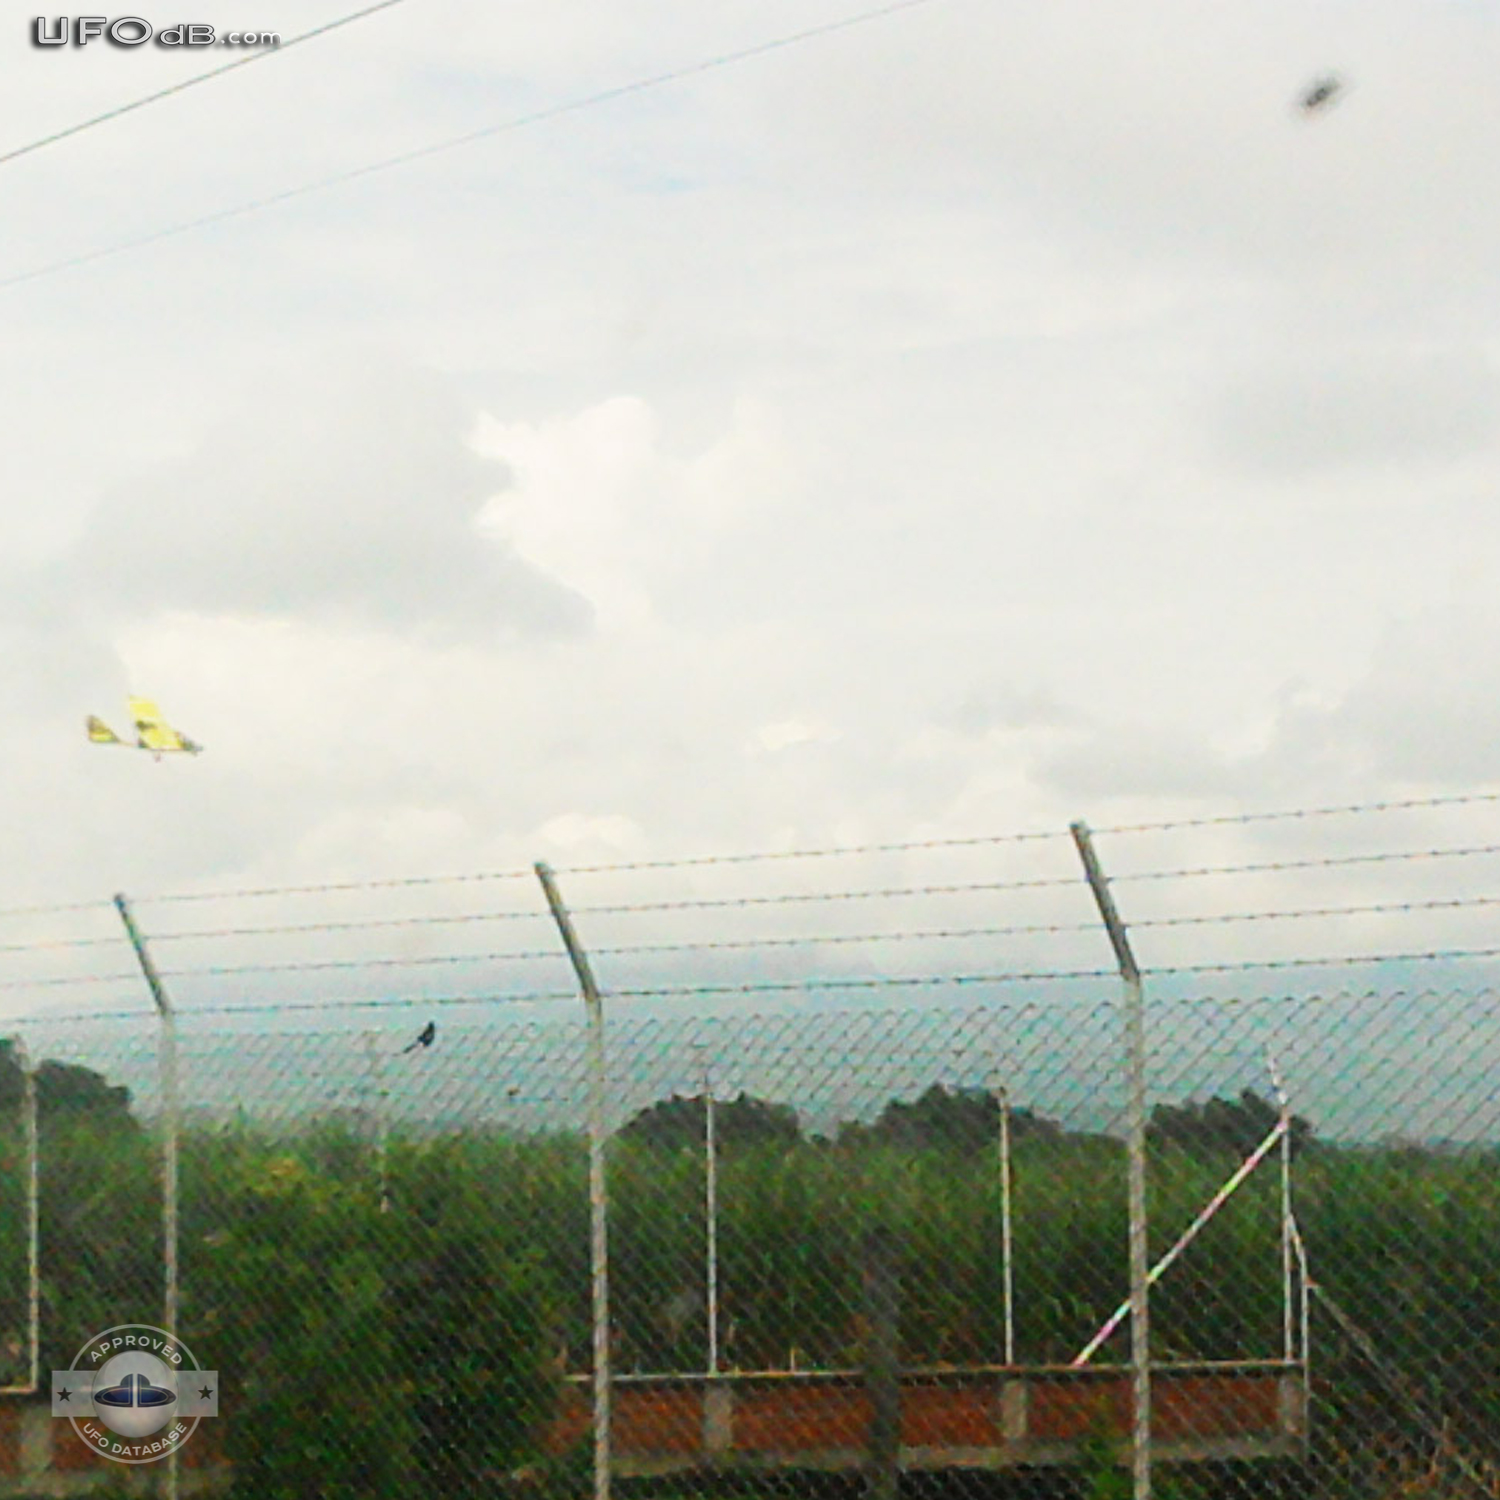 While looking at planes a Man see a UFO - Cauca, Colombia - March 2011 UFO Picture #280-2